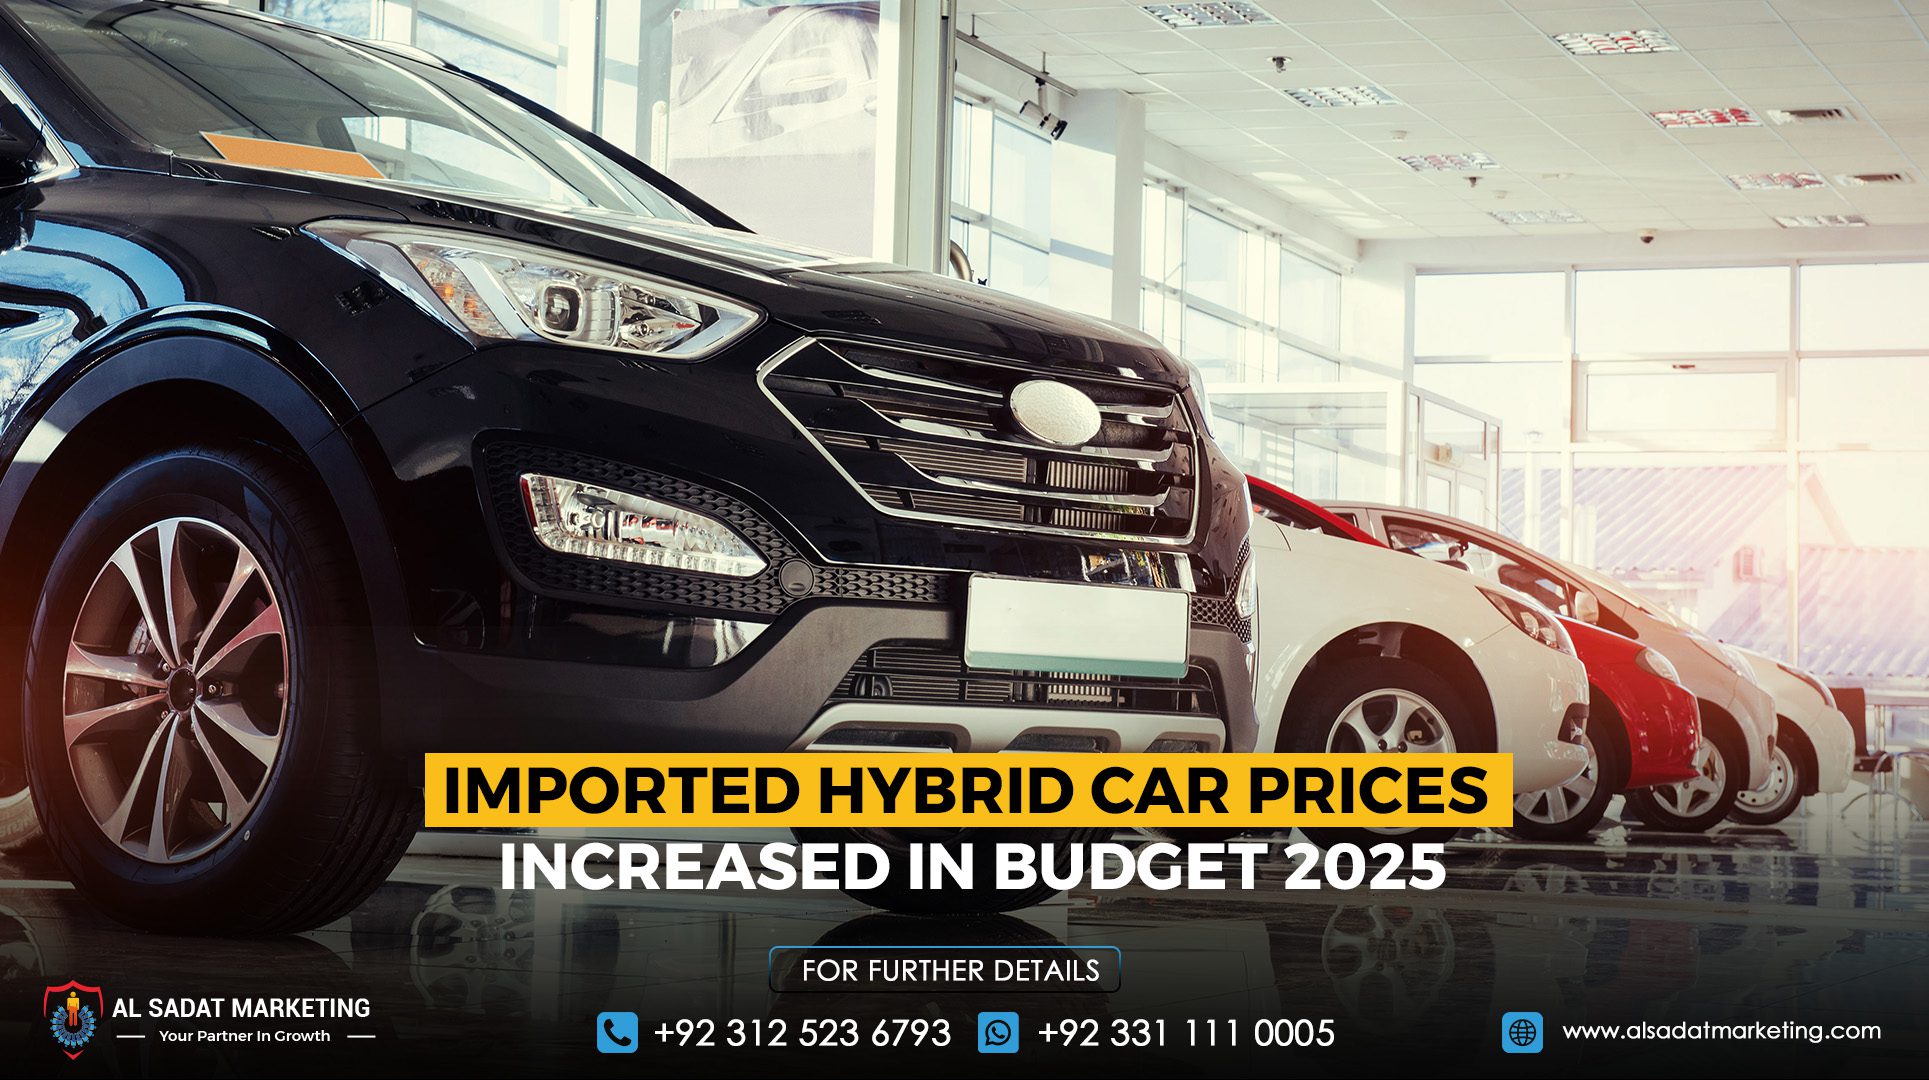 Imported Hybrid Car Prices Increased in Budget 2025